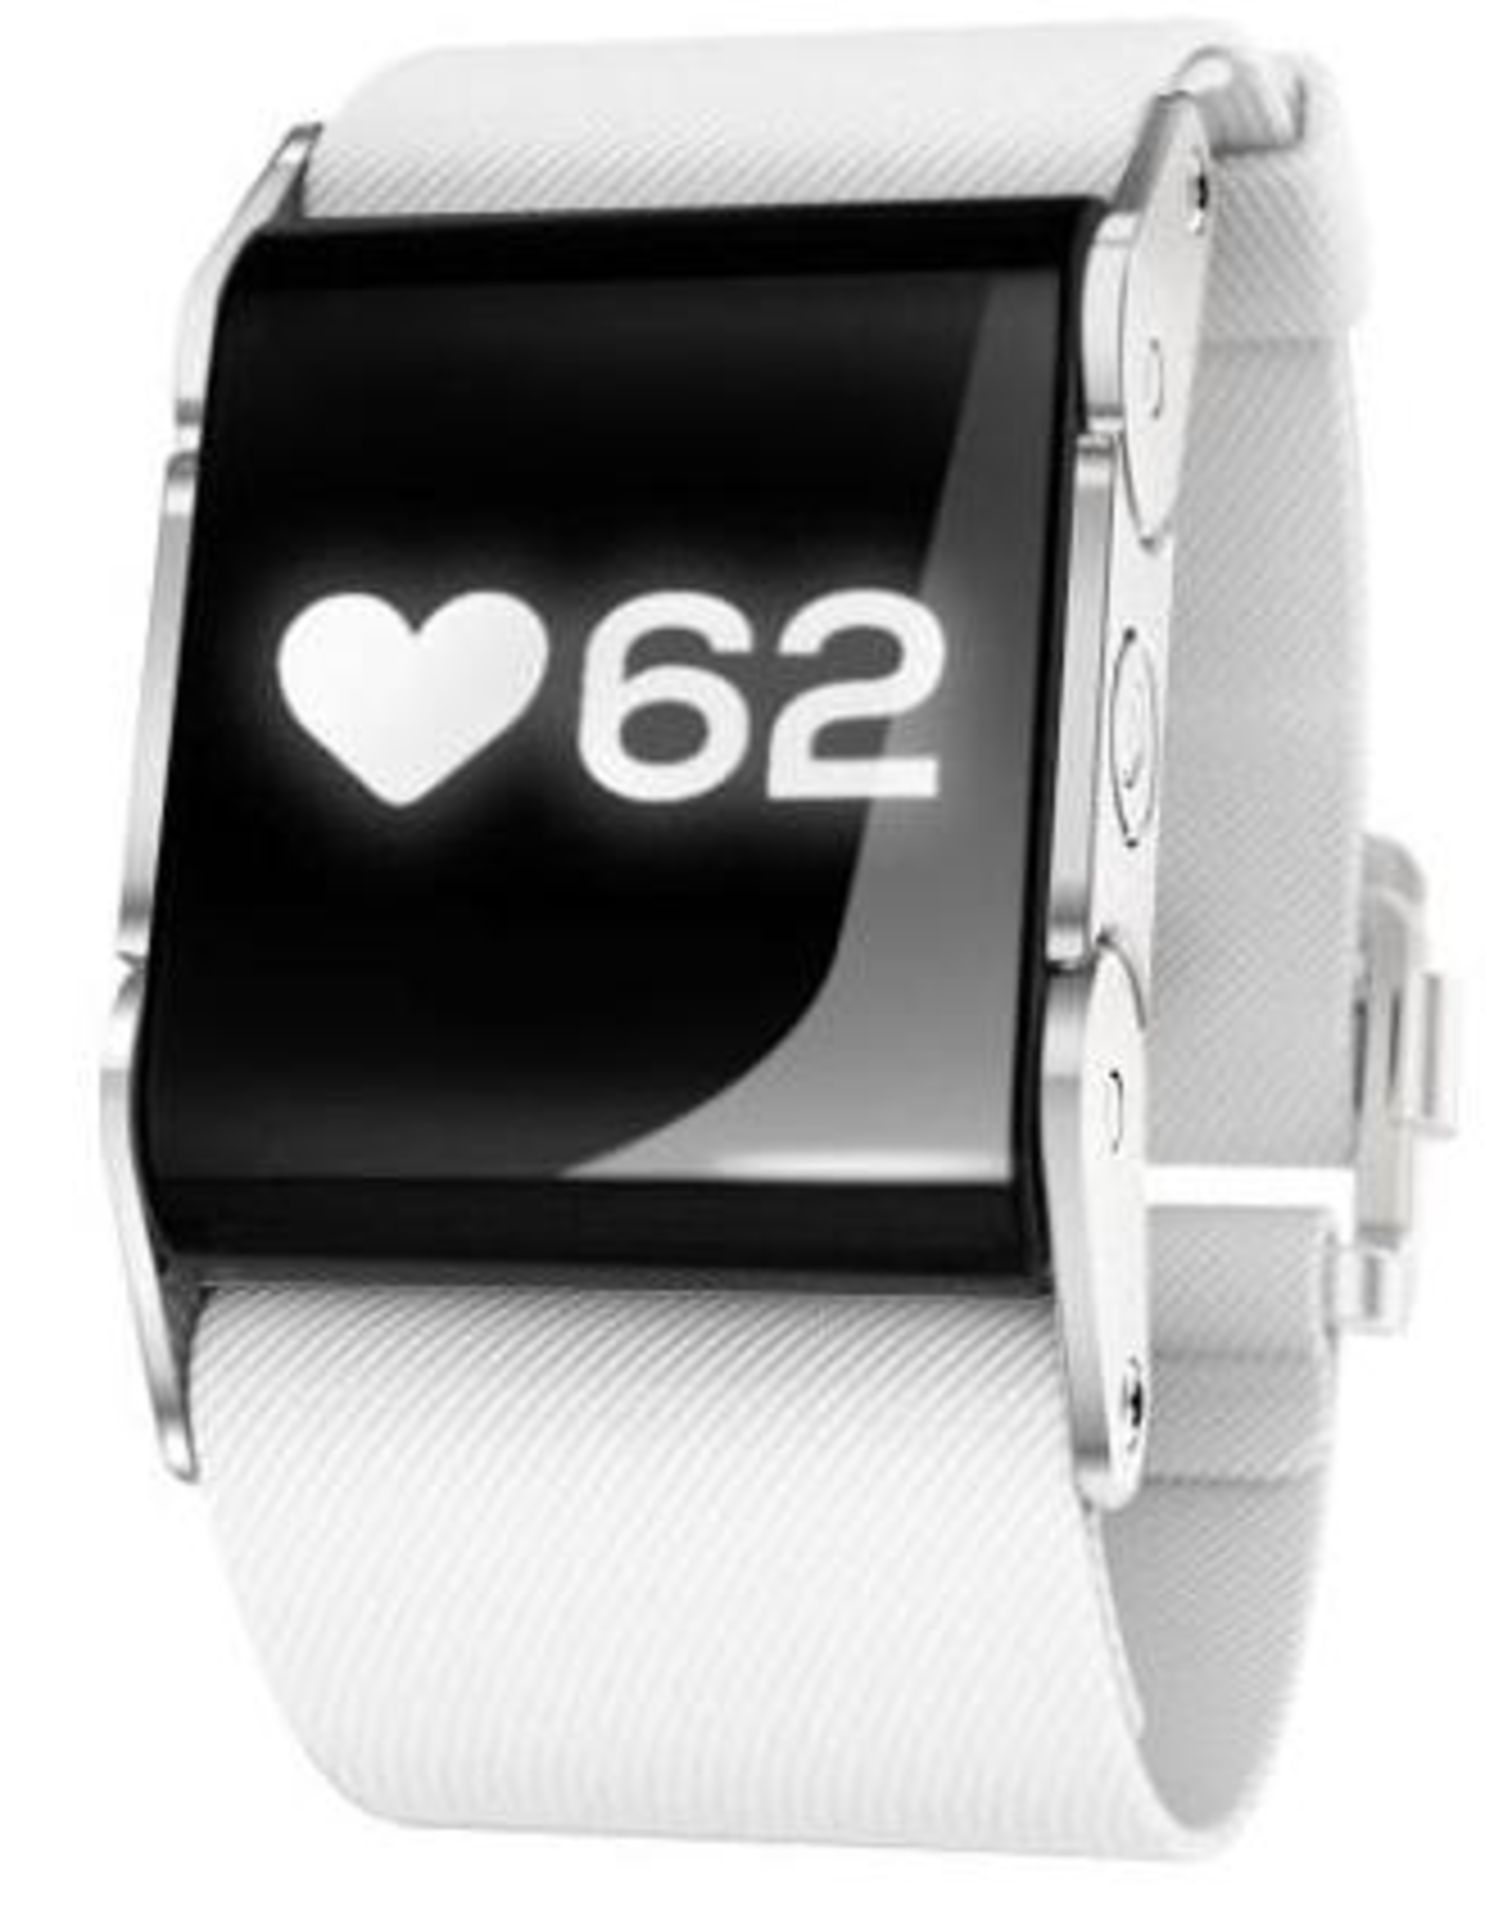 V *TRADE QTY* Brand New Pulse On Heart Rate Wrist Band - App Connectivity - Measures Training effect